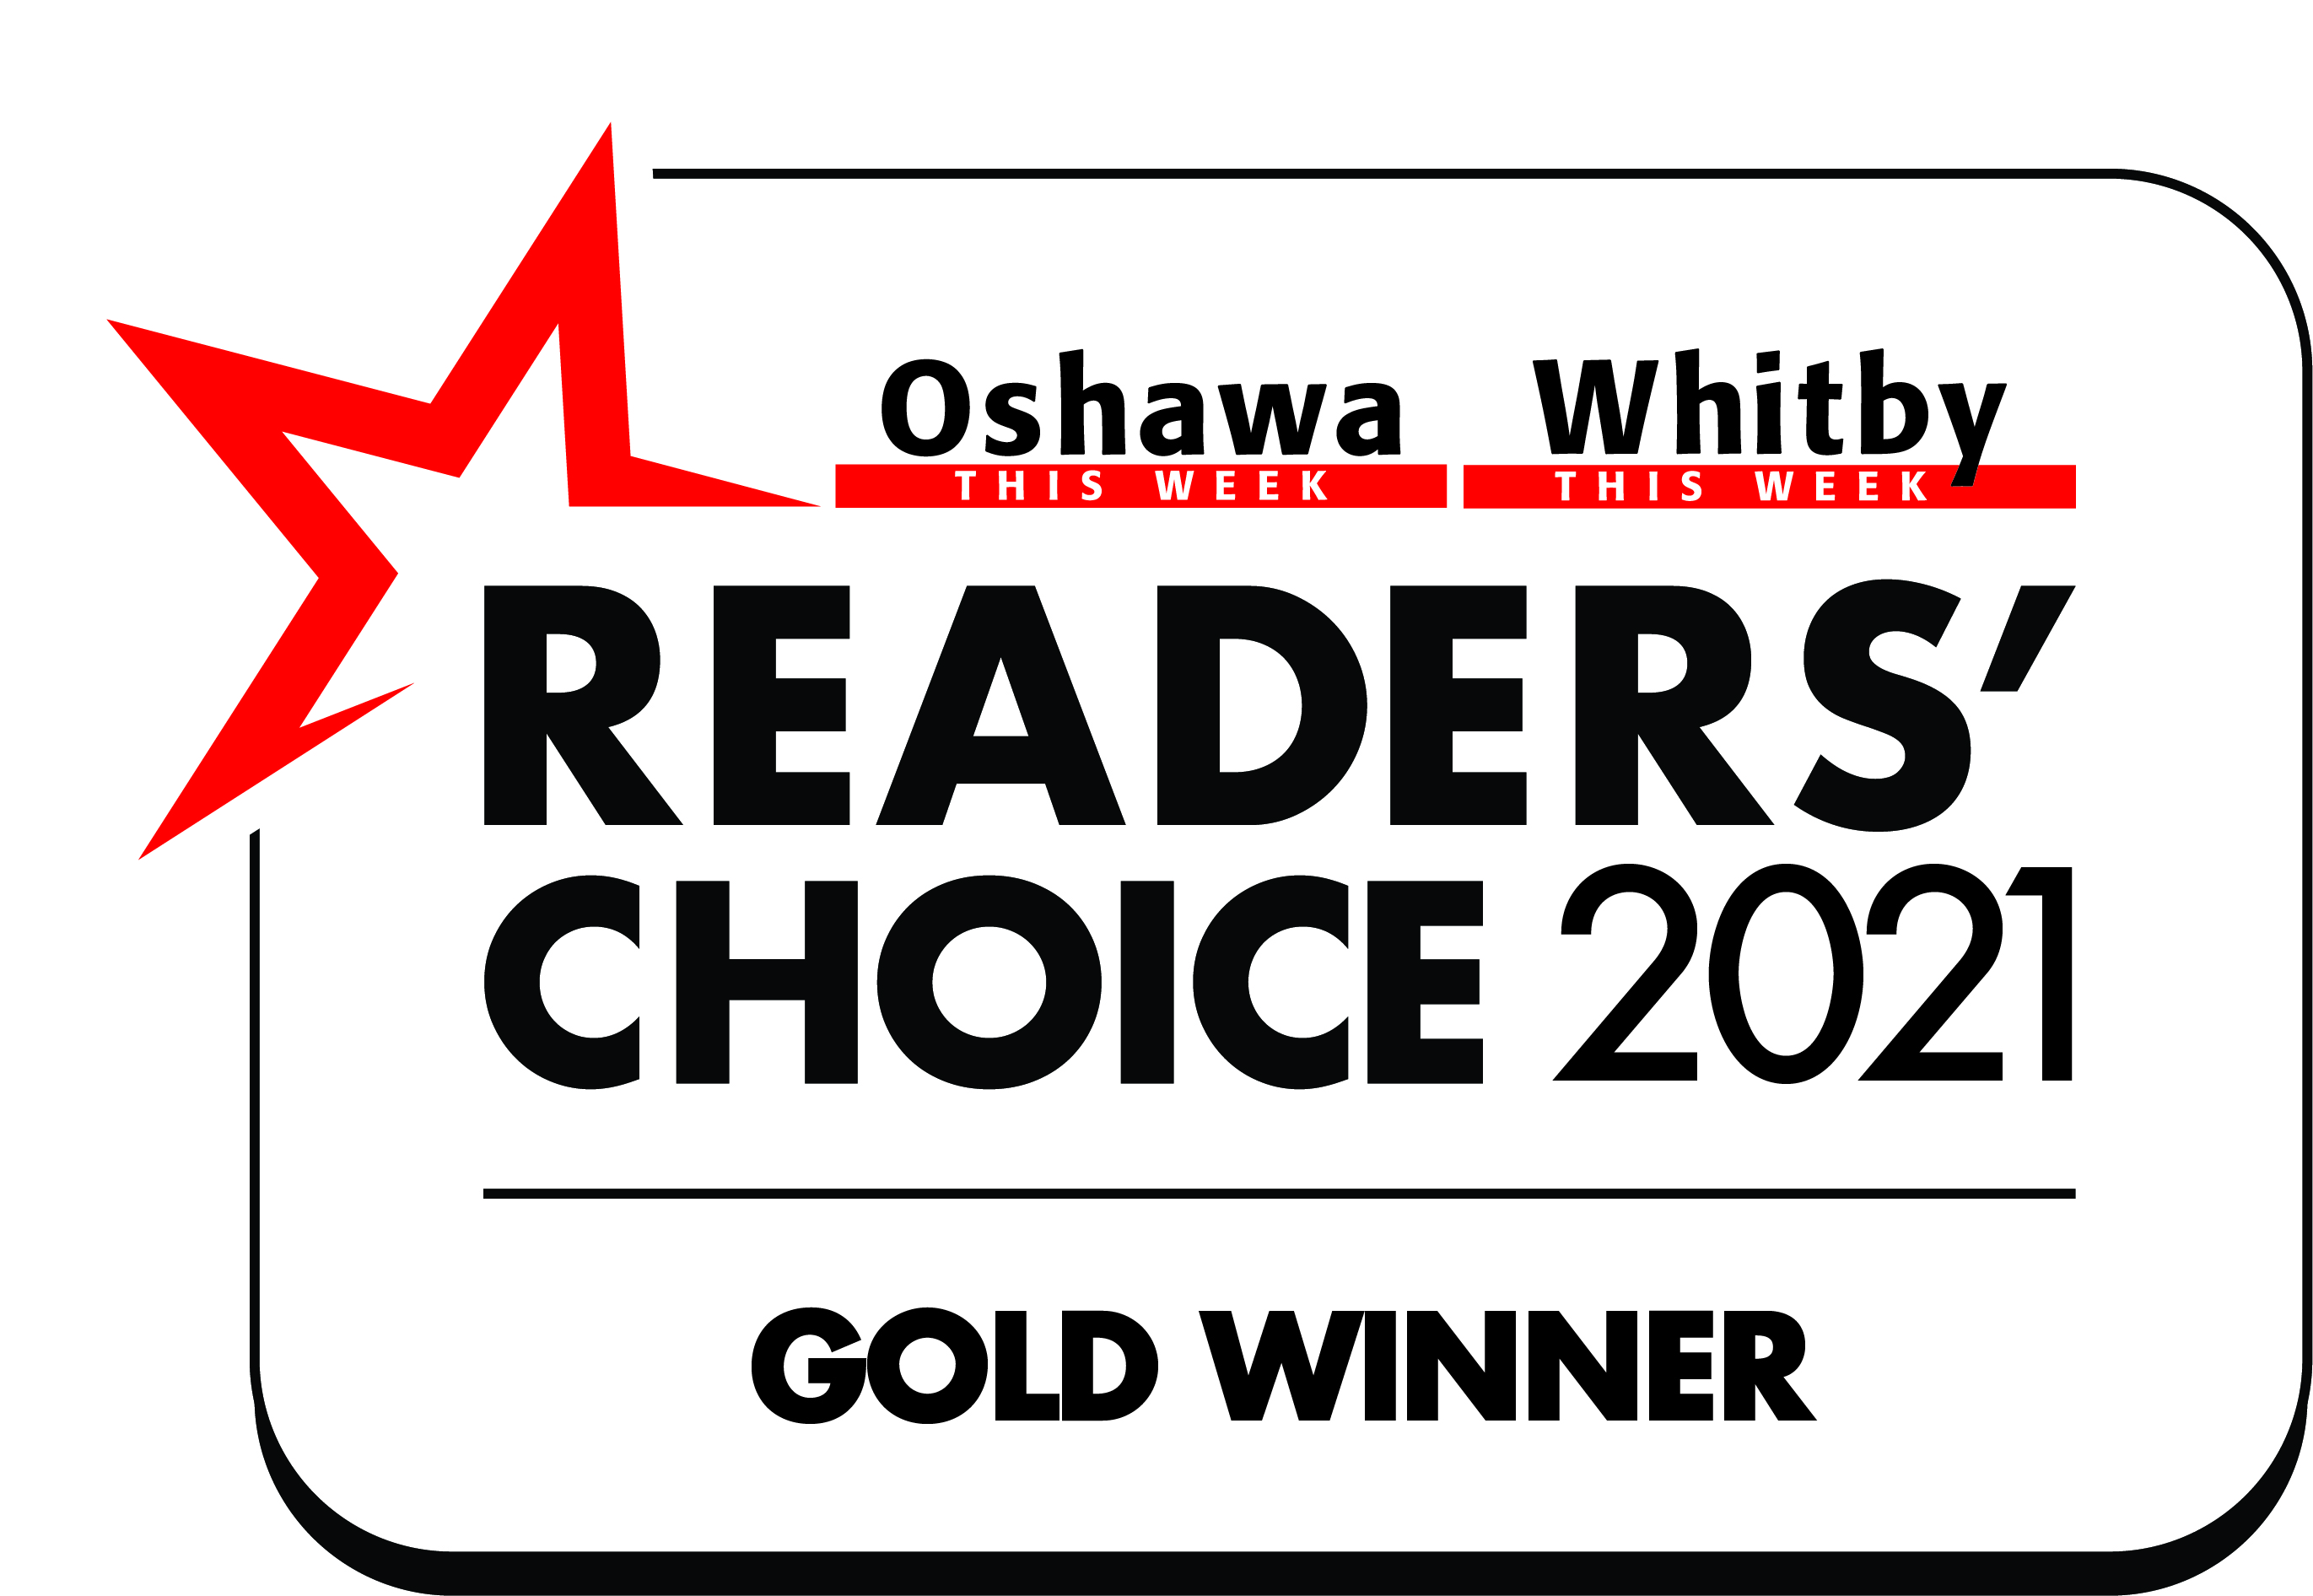 Readers' Choice Award for best Adult Education in Oshawa and Whitby